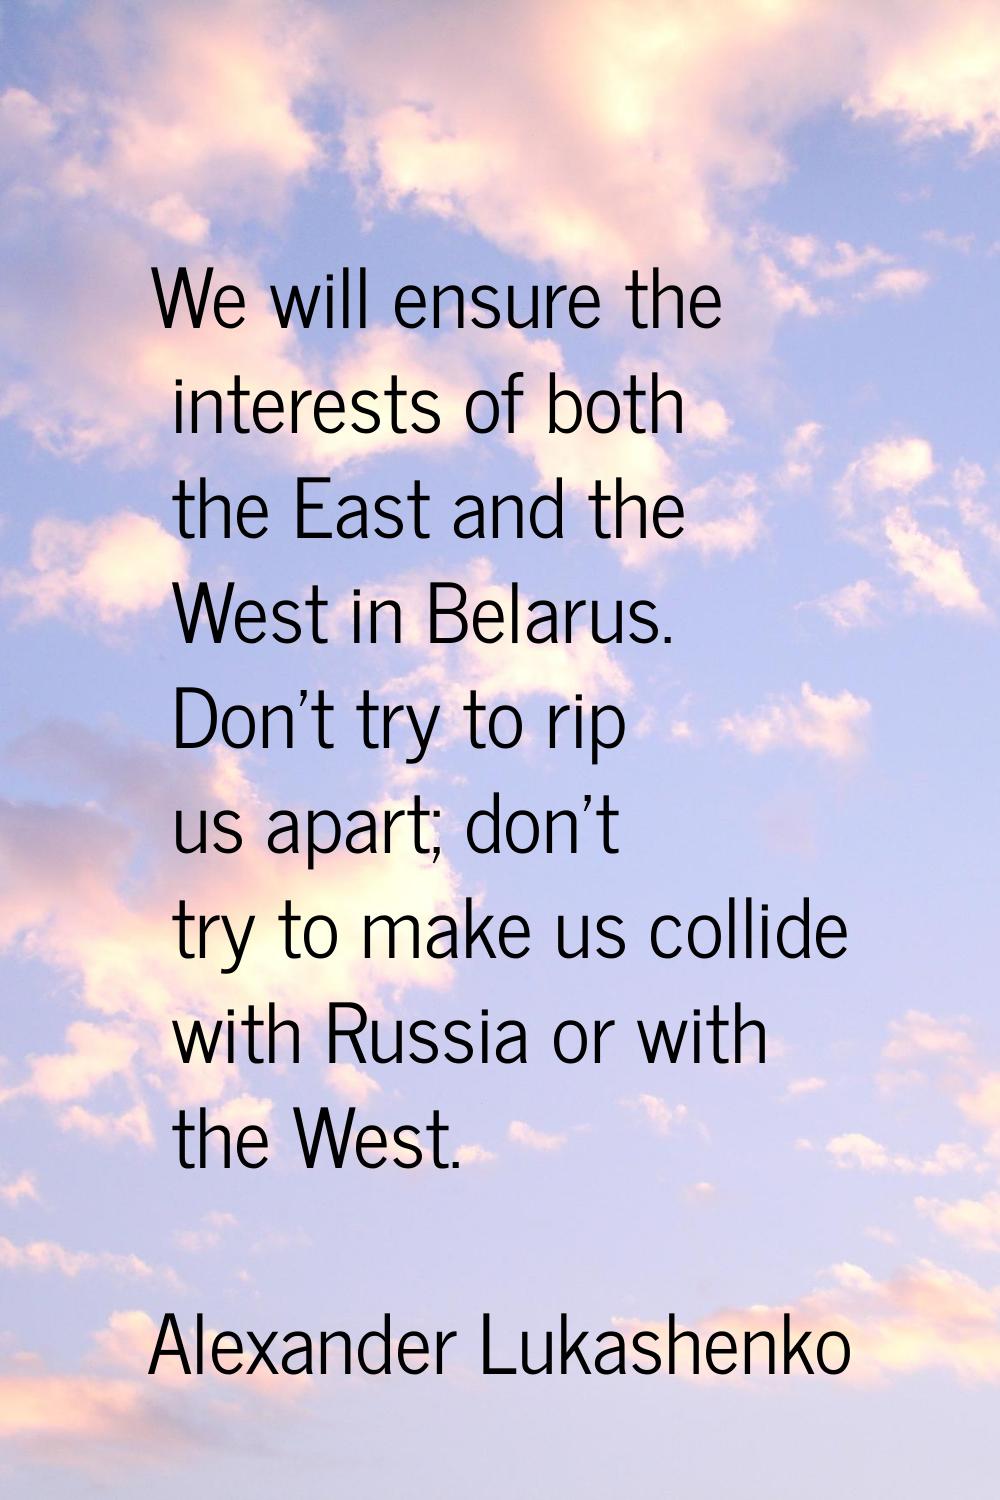 We will ensure the interests of both the East and the West in Belarus. Don't try to rip us apart; d